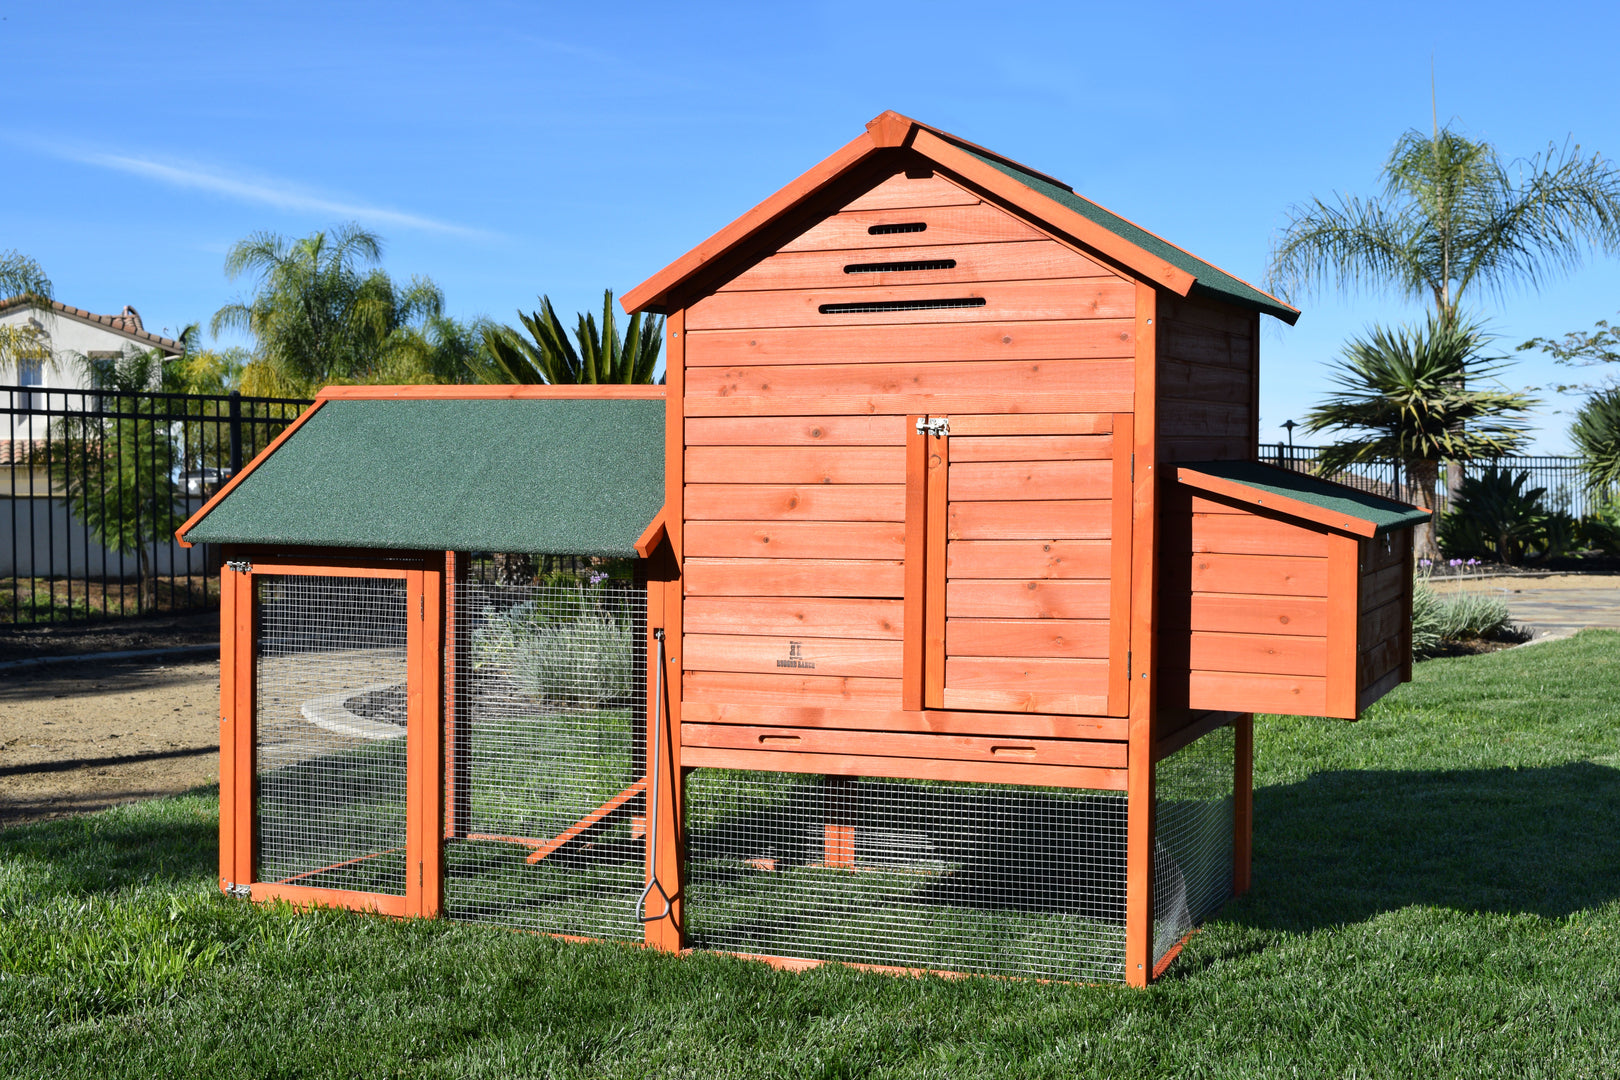 Rugged Ranch™ Raised Wood Chicken Coop (Up to 6 chickens)